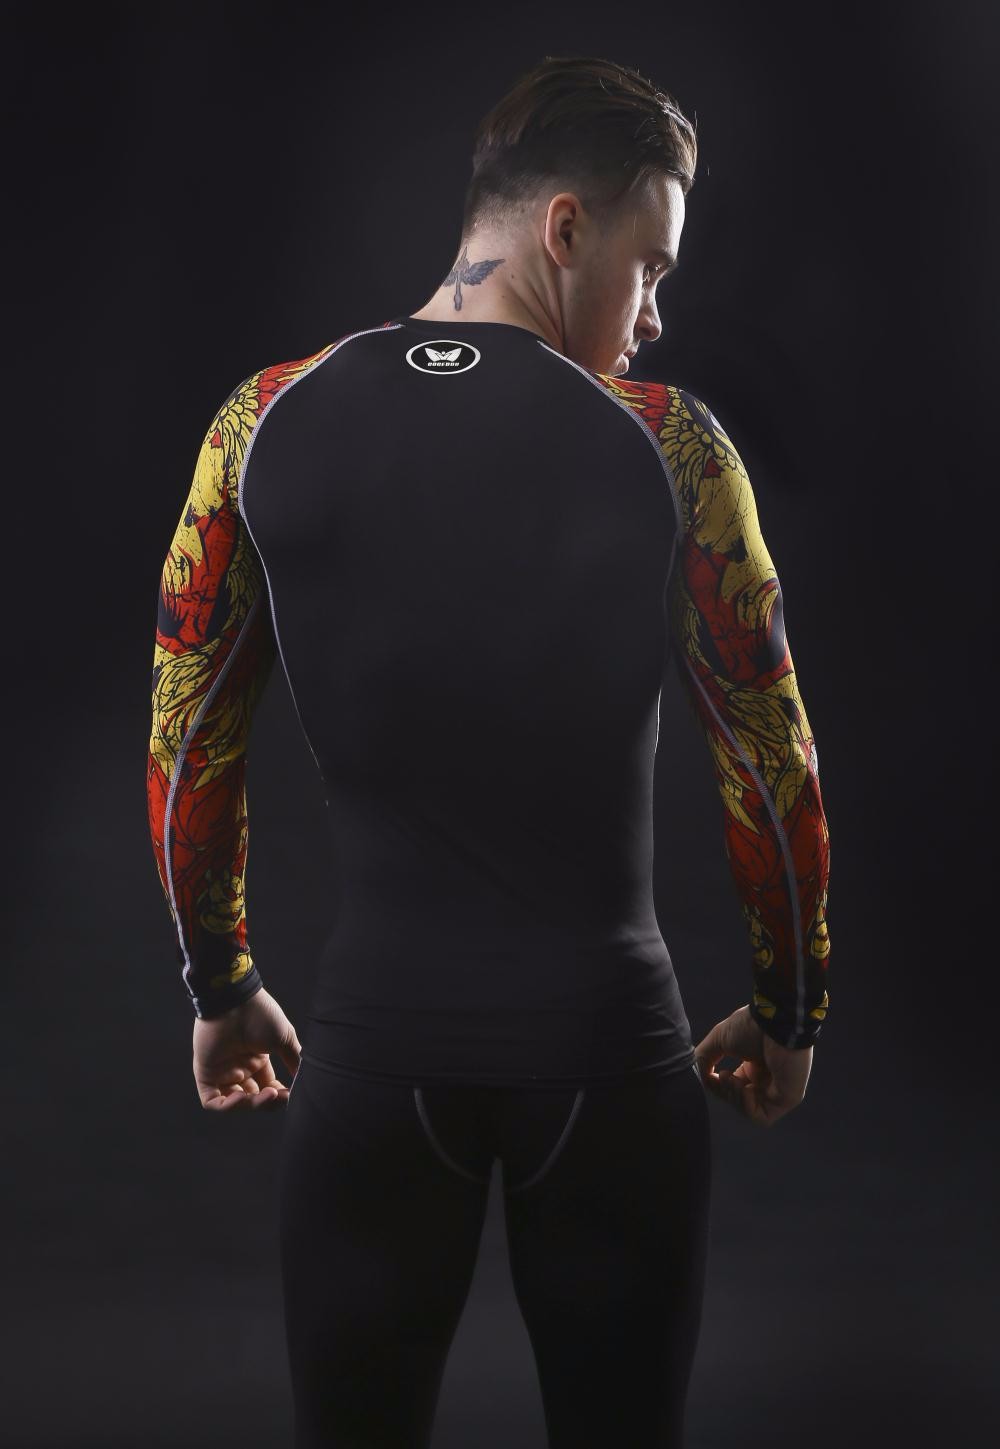 Men39s-Compression-Polyester-Tops-amp-Tees-Fashion-3D-Prints-Fitness-Skin-Tights-Long-Sleeve-Quick-d-32736074668